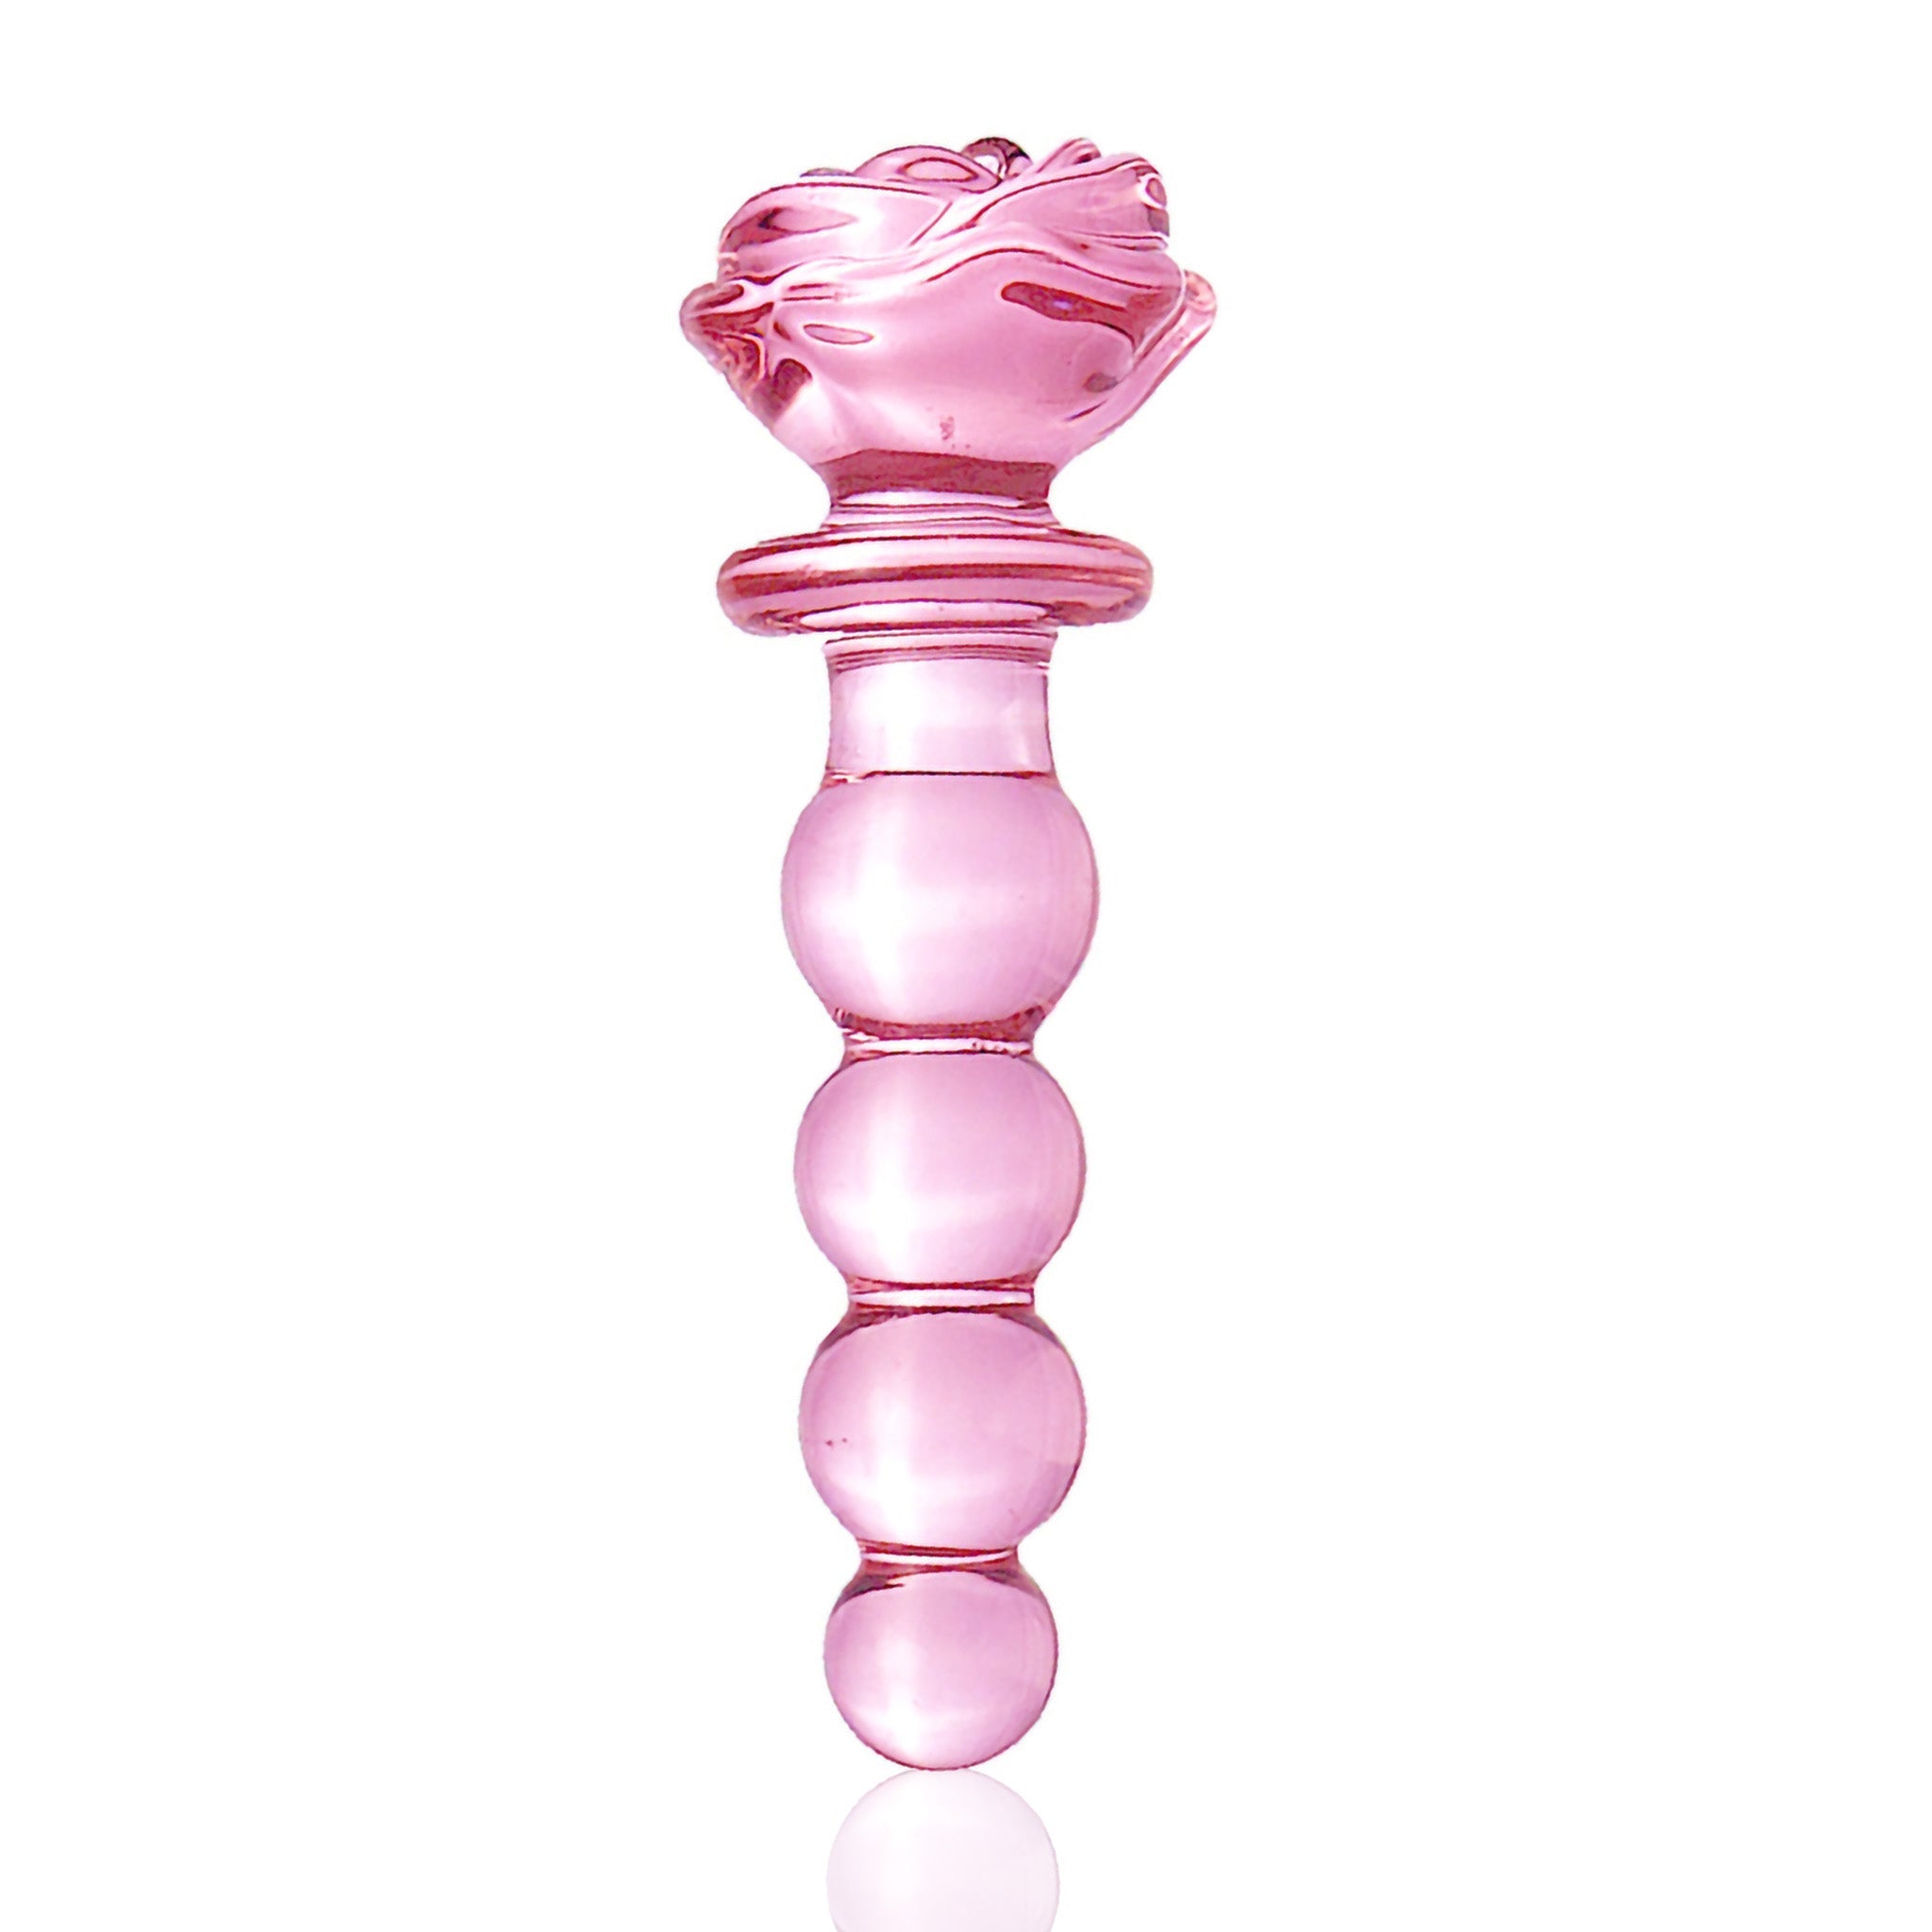 Beaded Pink Glass Anal Butt Plug Dildo Beads Anal Sex Toys for Men Women Couples